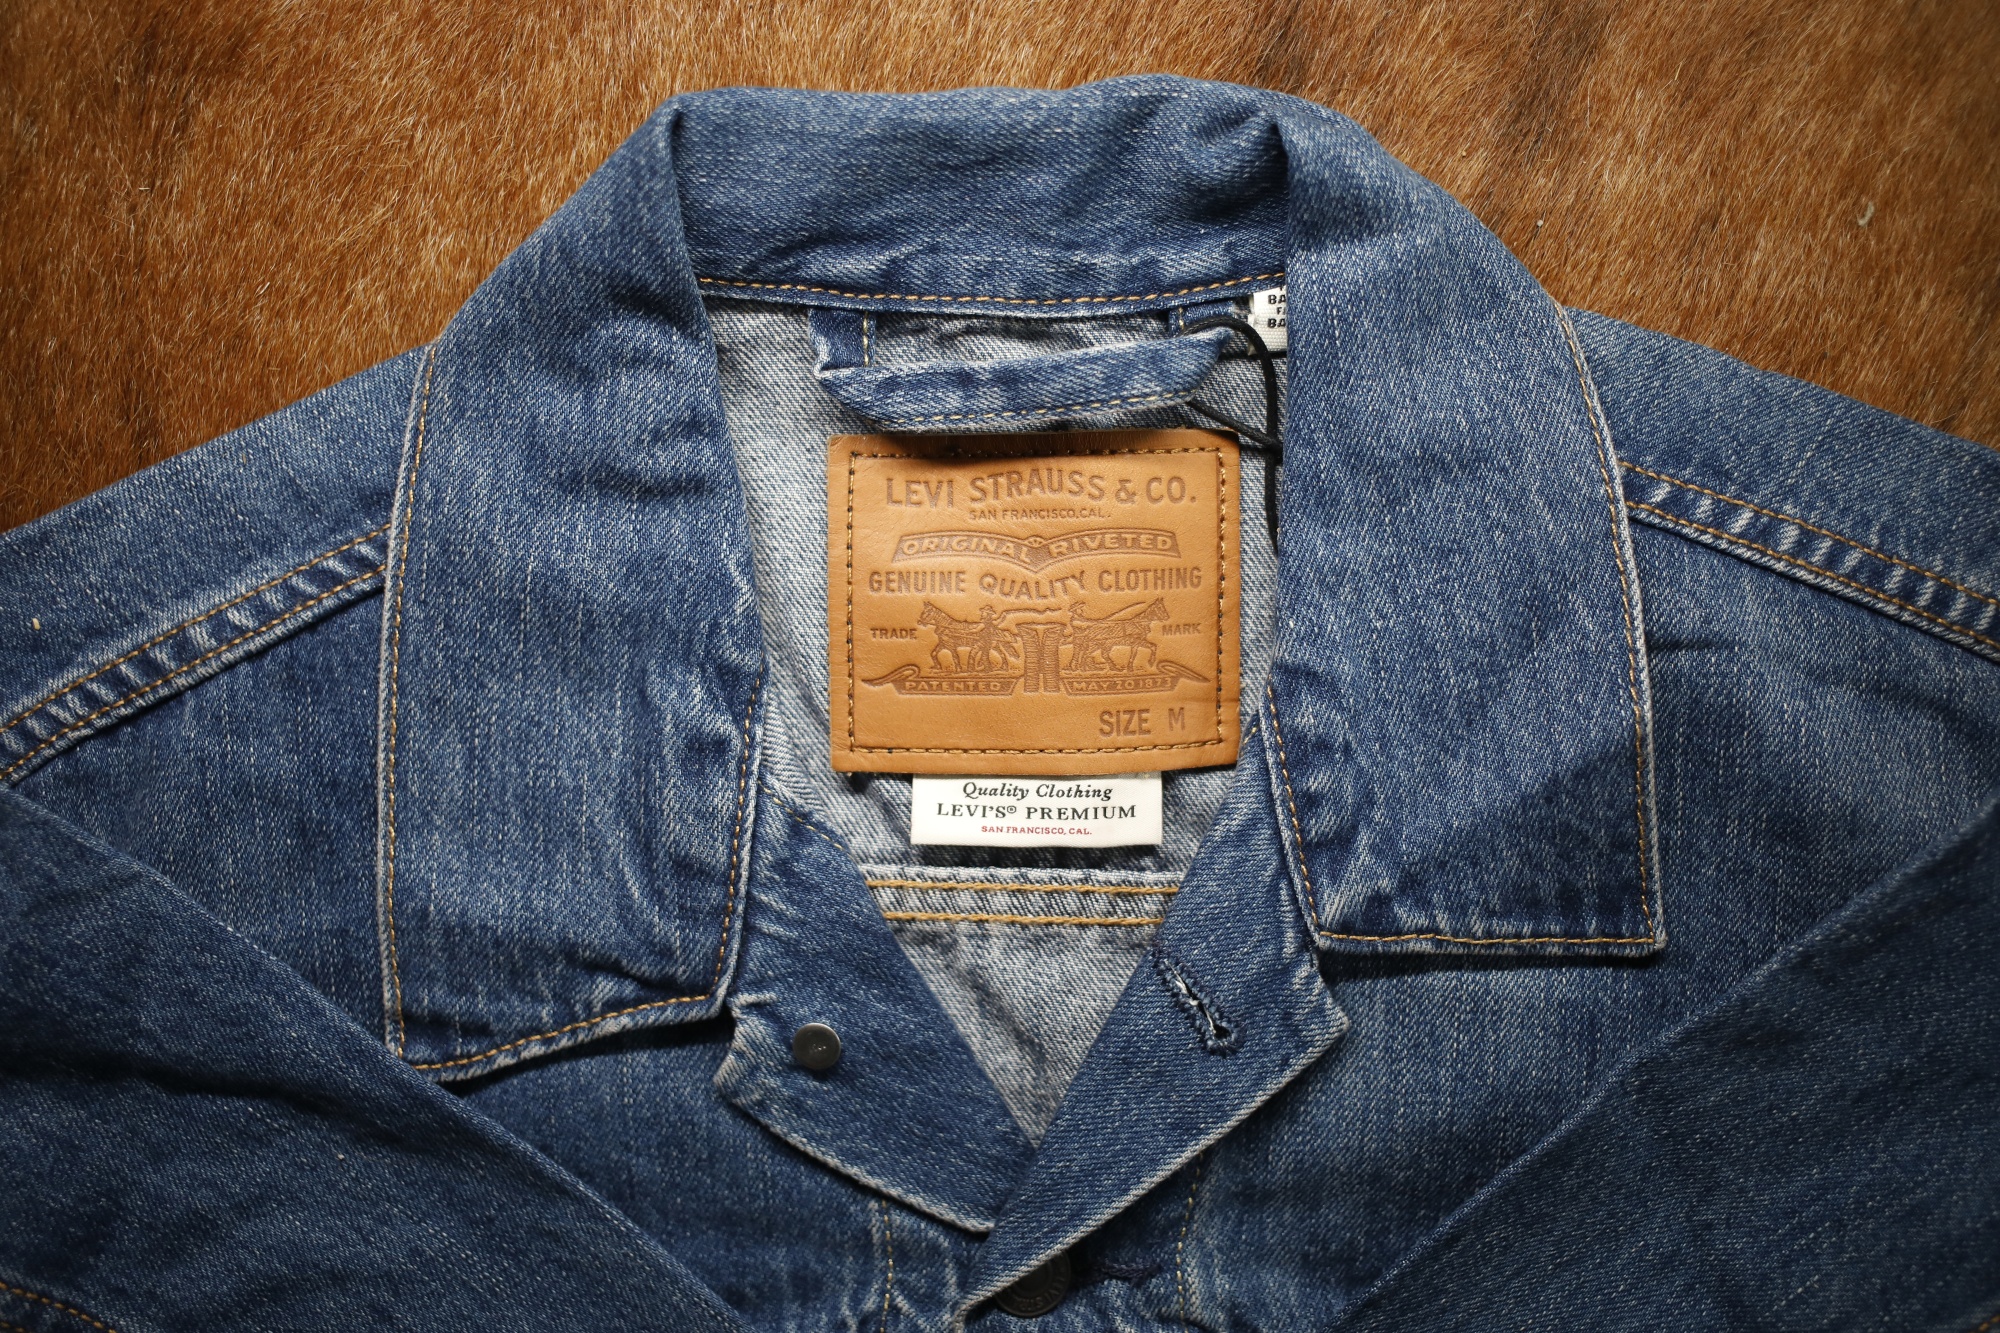 Levi Strauss Outlook by Stronger Supply-Chain Disruptions - Bloomberg